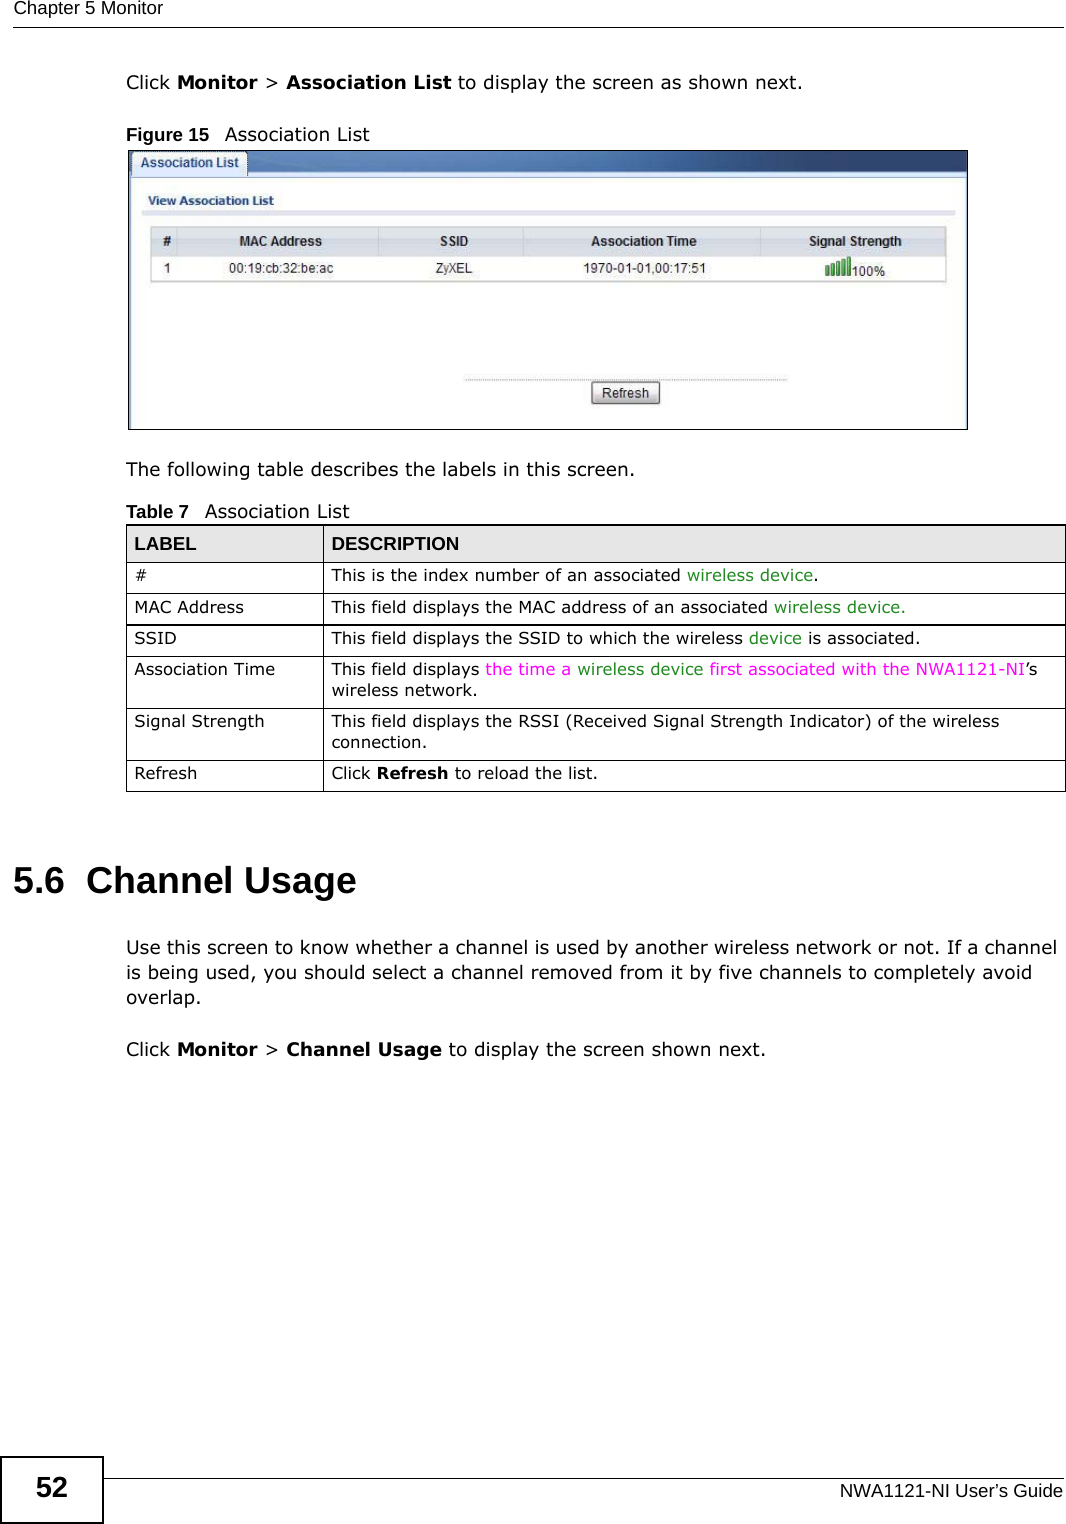 Chapter 5 MonitorNWA1121-NI User’s Guide52Click Monitor &gt; Association List to display the screen as shown next.Figure 15   Association ListThe following table describes the labels in this screen.5.6  Channel UsageUse this screen to know whether a channel is used by another wireless network or not. If a channel is being used, you should select a channel removed from it by five channels to completely avoid overlap. Click Monitor &gt; Channel Usage to display the screen shown next.Table 7   Association ListLABEL DESCRIPTION#This is the index number of an associated wireless device.MAC Address This field displays the MAC address of an associated wireless device.SSID This field displays the SSID to which the wireless device is associated.Association Time This field displays the time a wireless device first associated with the NWA1121-NI’s wireless network.Signal Strength This field displays the RSSI (Received Signal Strength Indicator) of the wireless connection.Refresh Click Refresh to reload the list. 